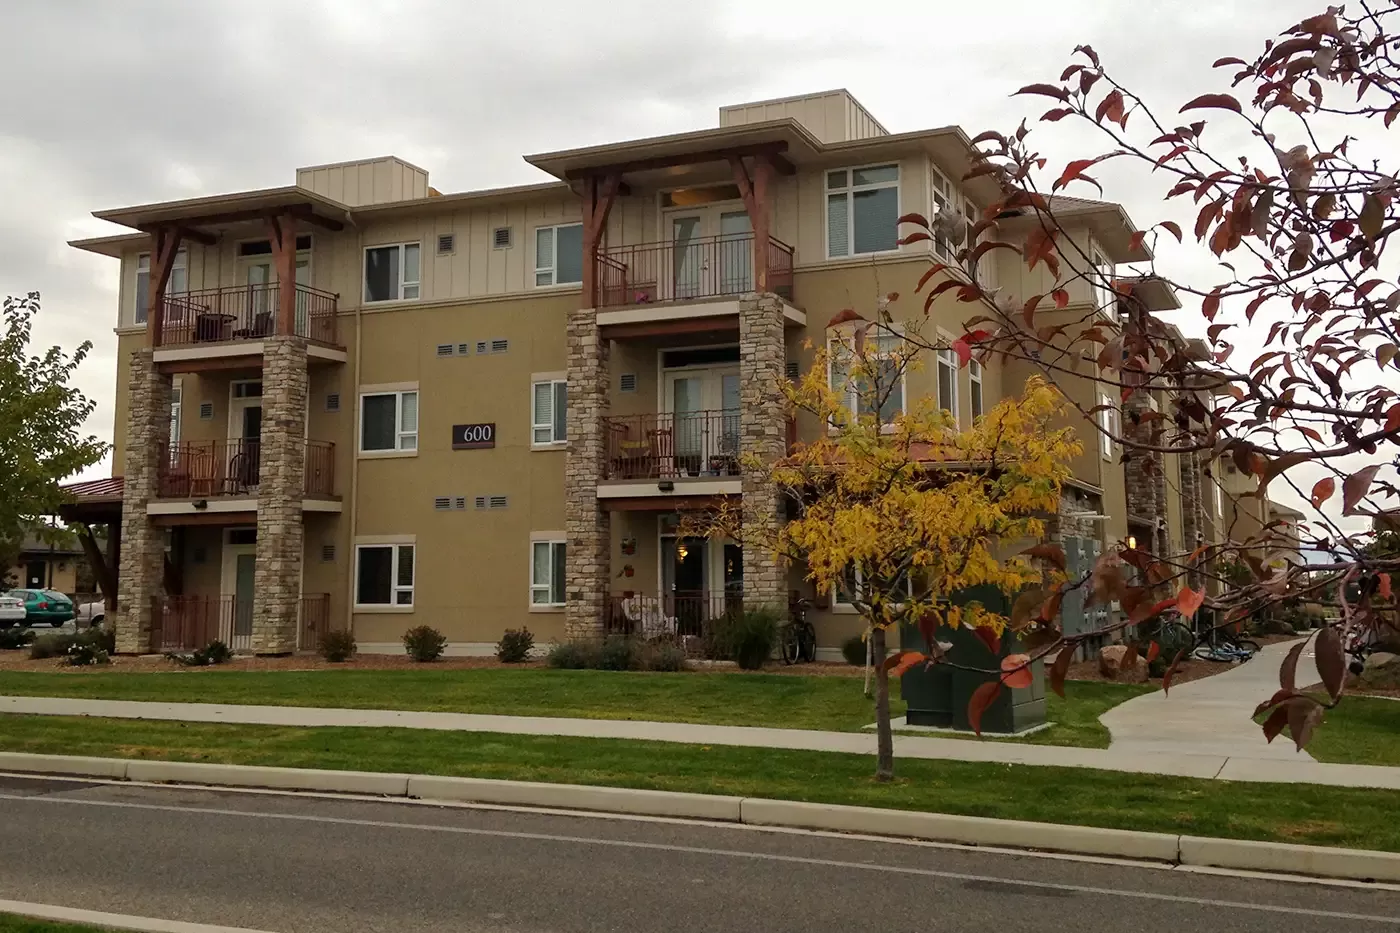 Photo of the Village Park Apartments in Grand Junction, Colorado